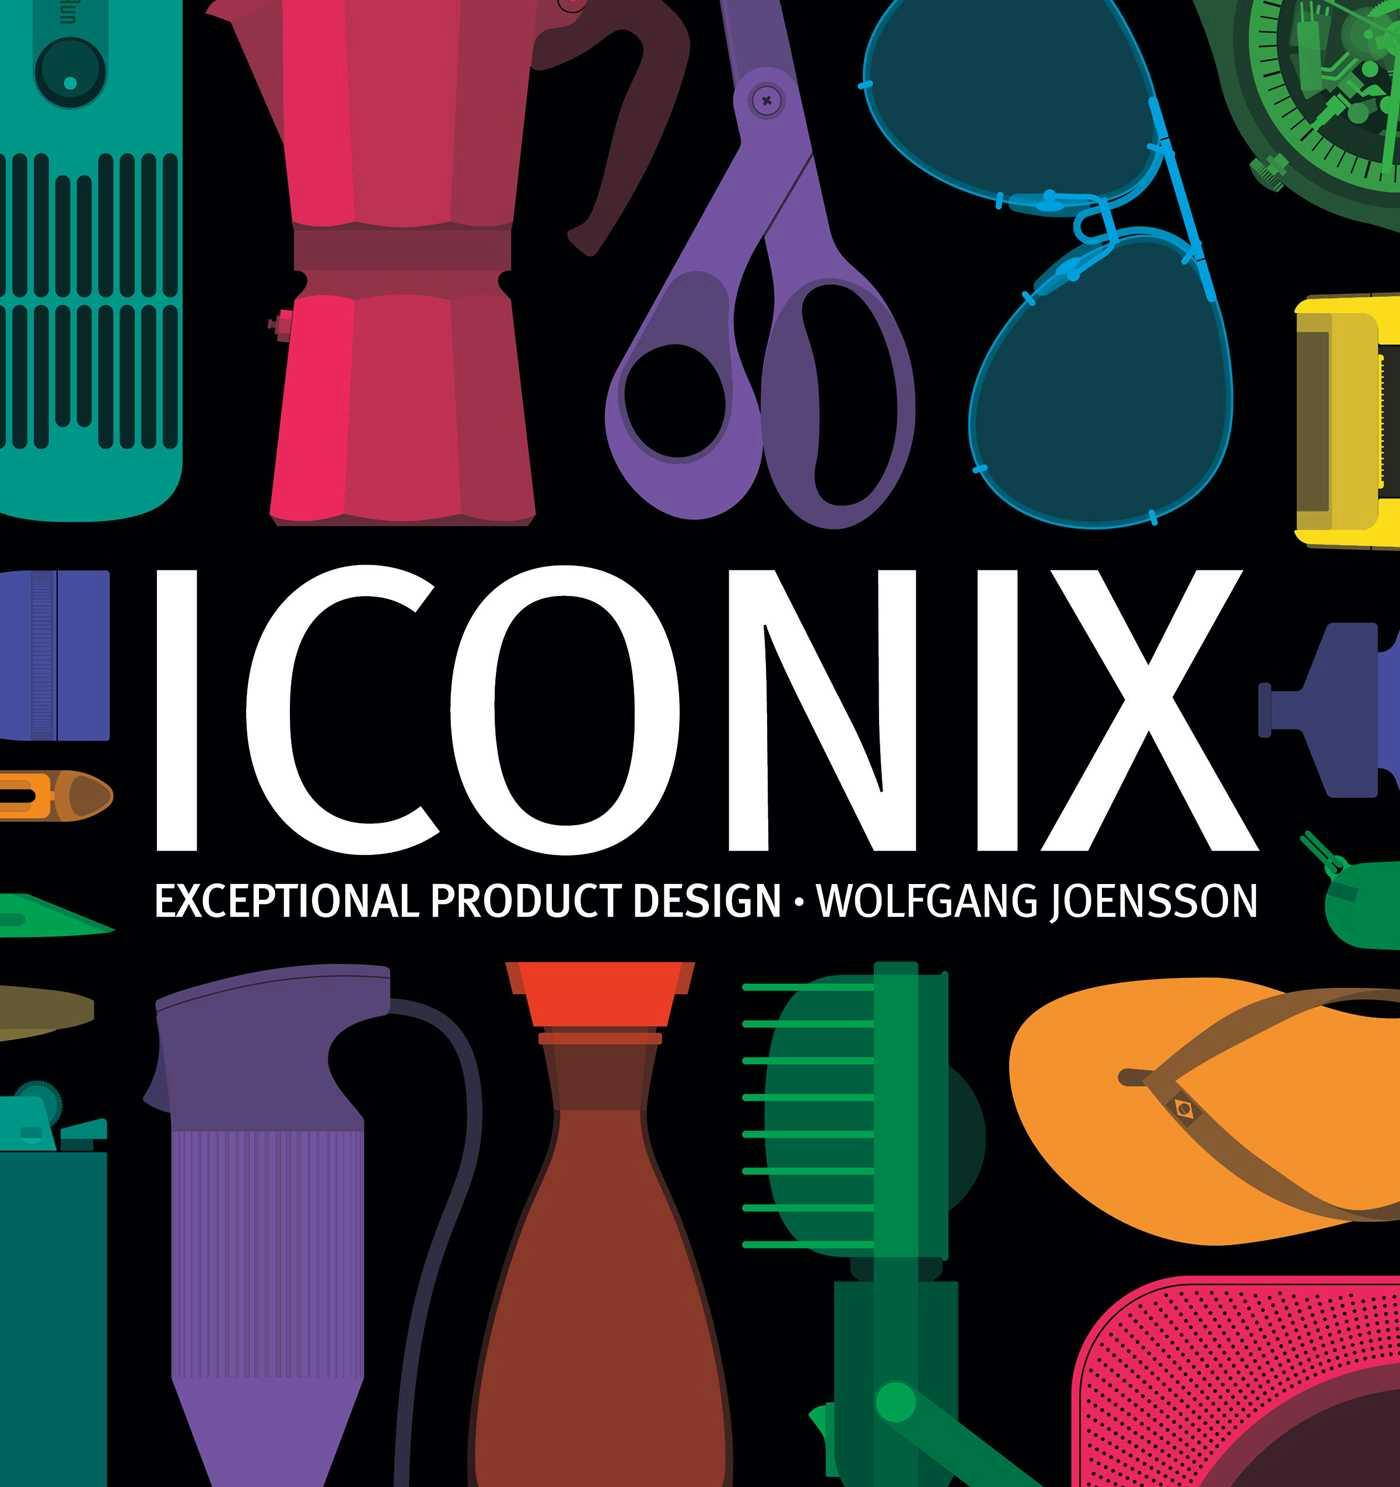 Iconix: Exceptional Product Design - Wolfgang Joensson